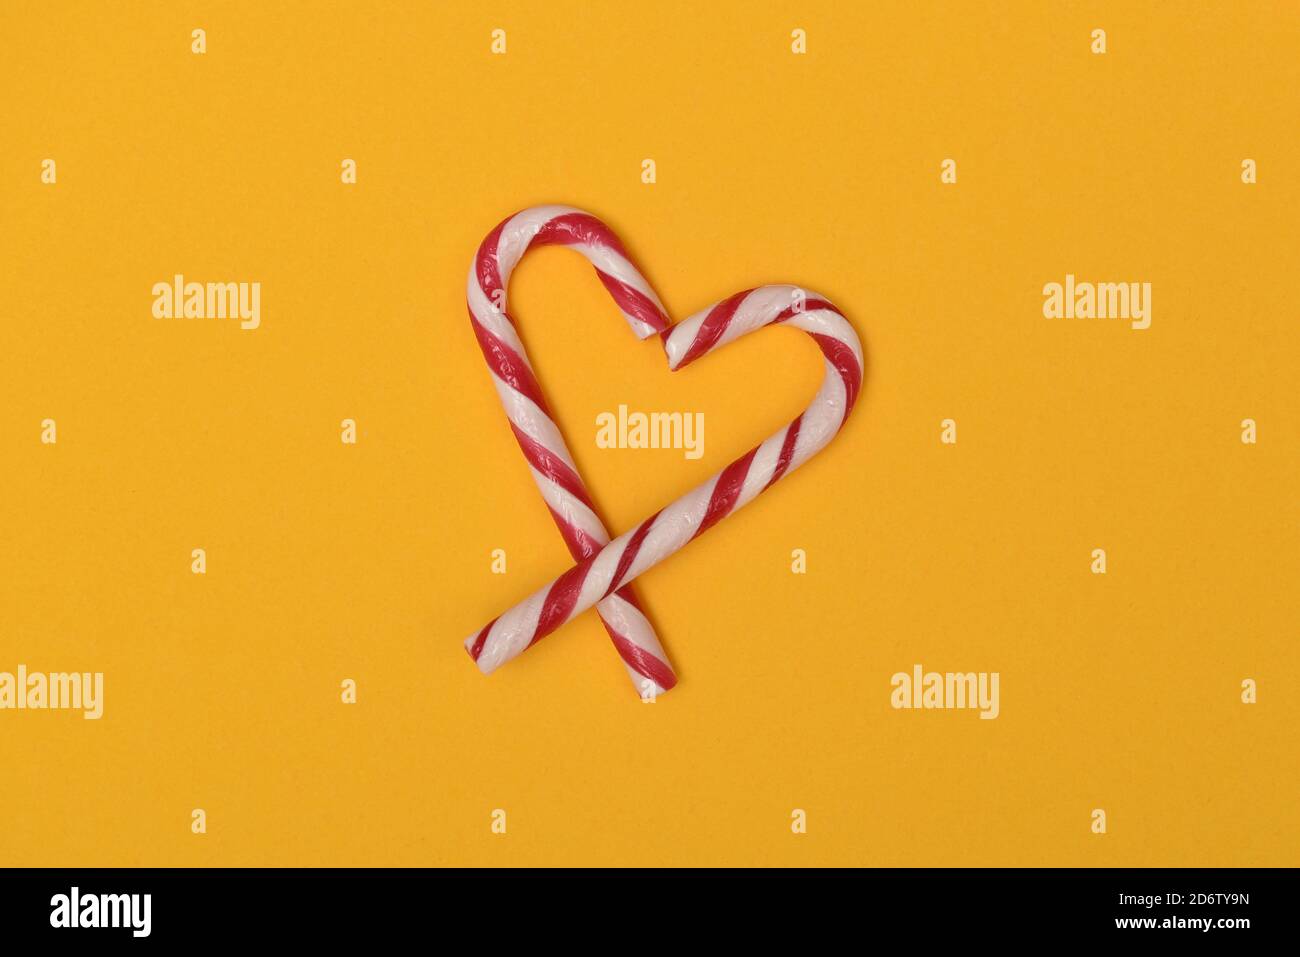 candy canes shaped as a heart isolated on a yellow background Stock Photo